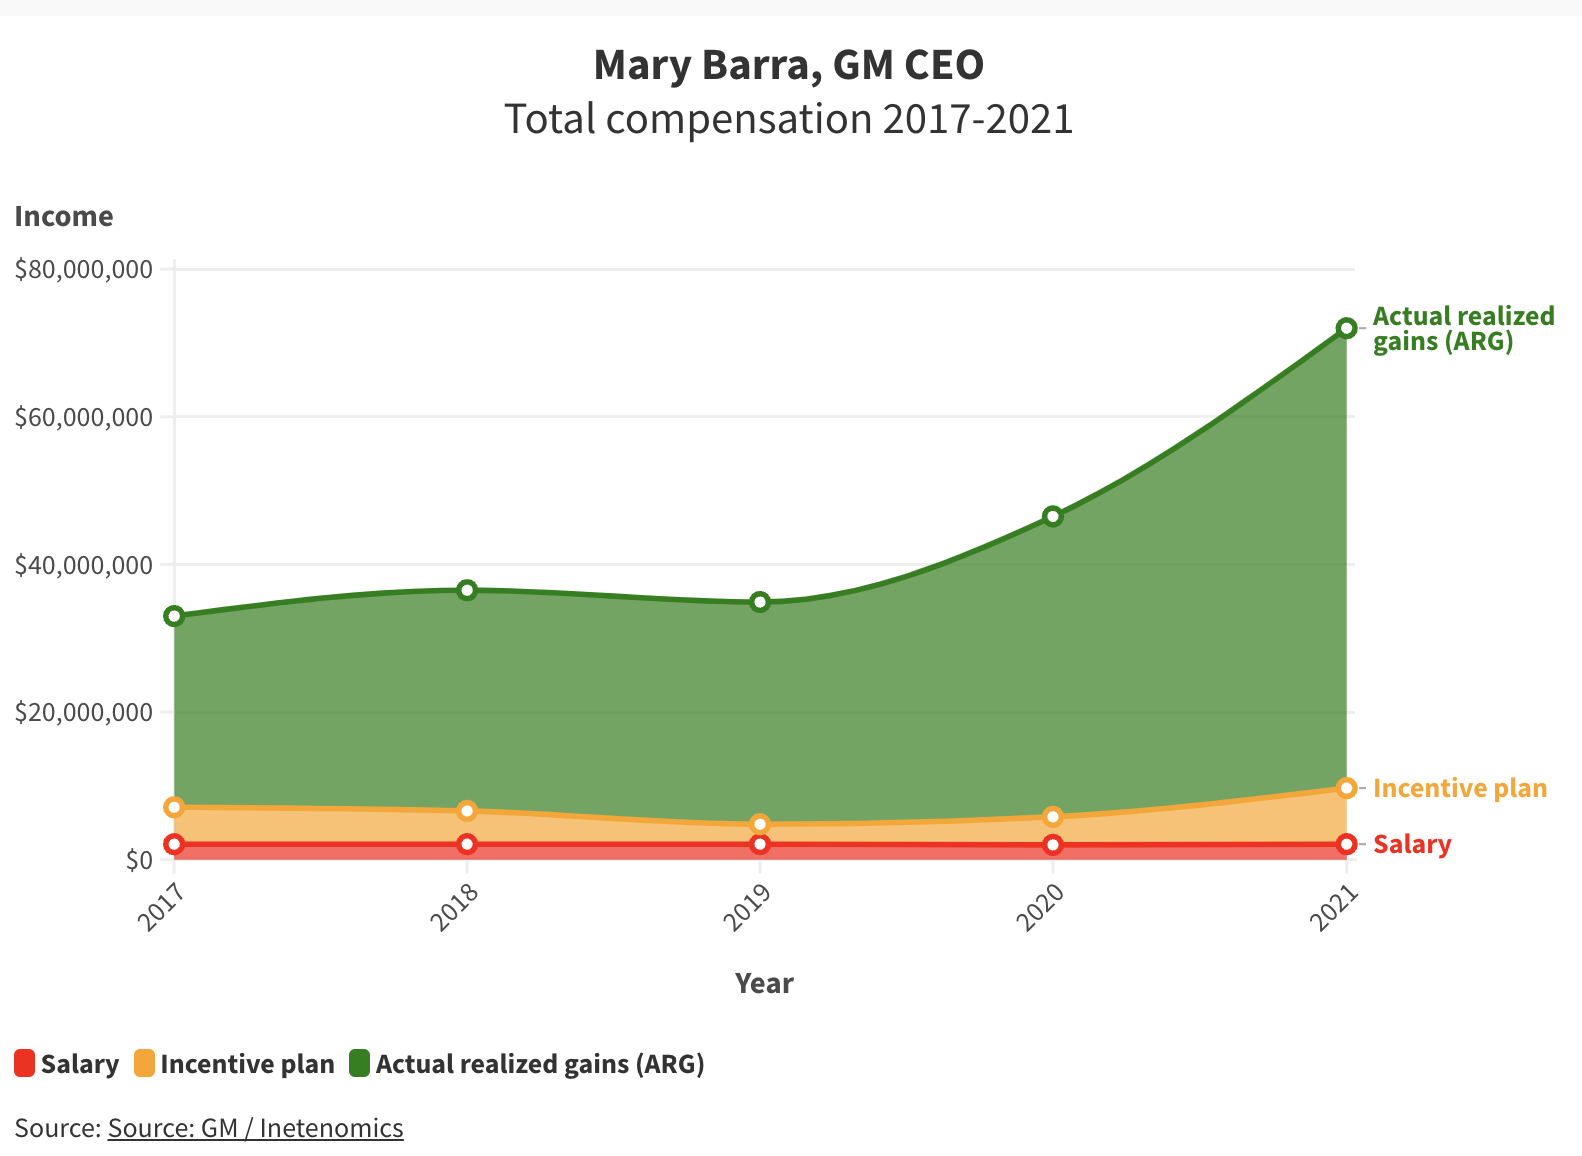 Mary Barra makes millions from Actual Realized Gains